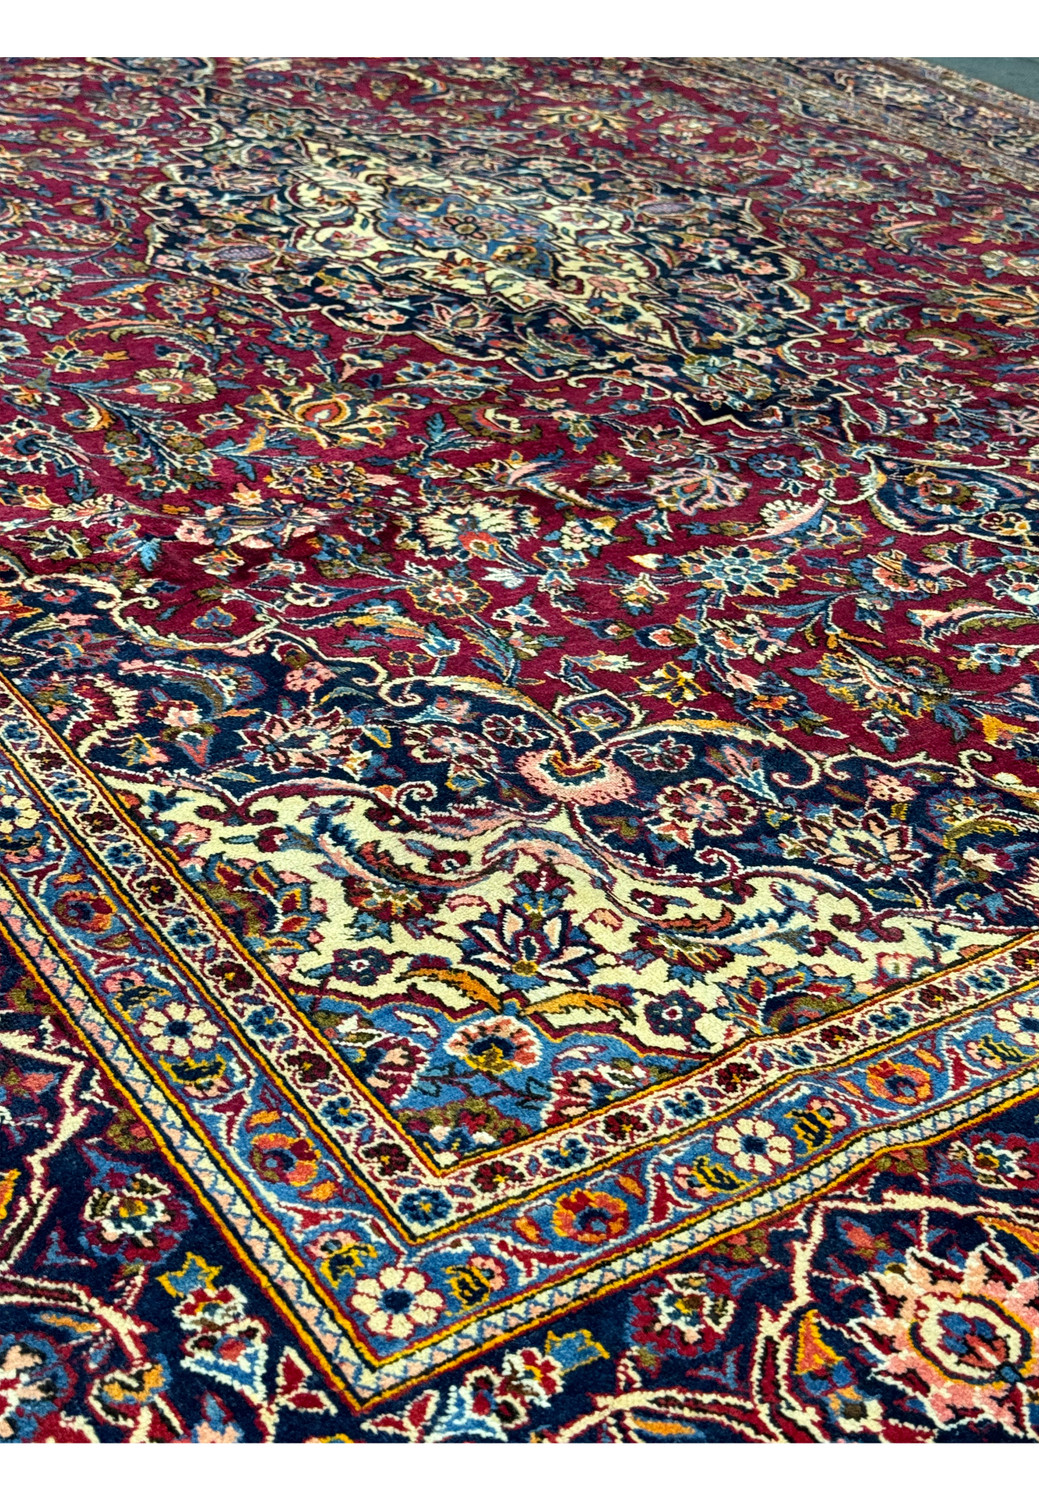 Angled perspective of a Persian Kashan rug with a rich burgundy field and detailed floral patterns with navy and cream borders